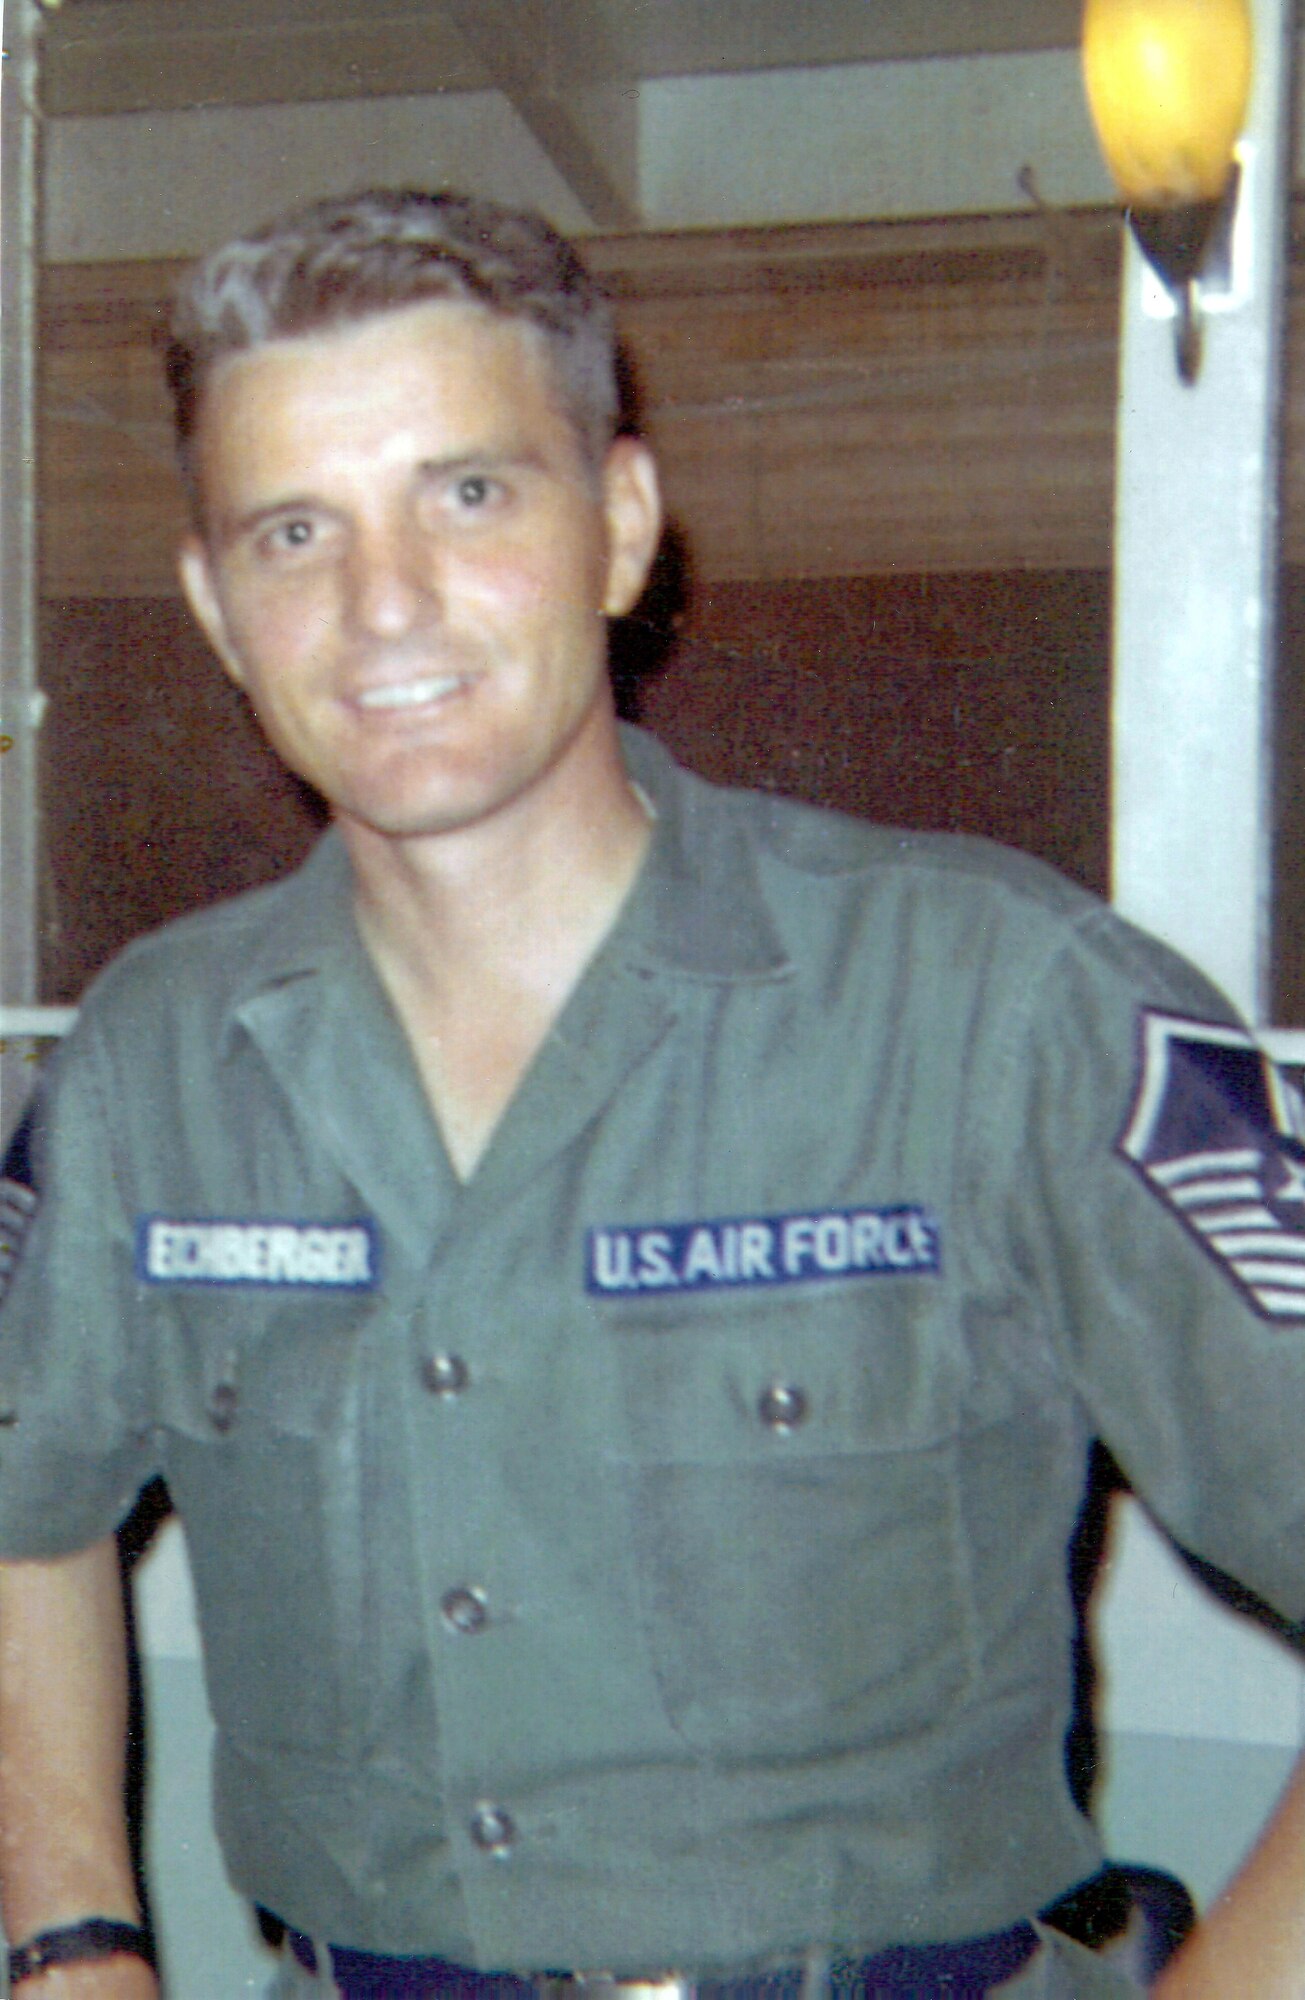 Chief Master Sgt. Richard L. "Dick" Etchberger, an Air Force senior NCO who was killed after saving the lives of some of his crew during a fierce battle at a radar site in Laos 42 years ago, will receive the Medal of Honor Sept. 21 in a White House ceremony.  (Courtesy photo)
